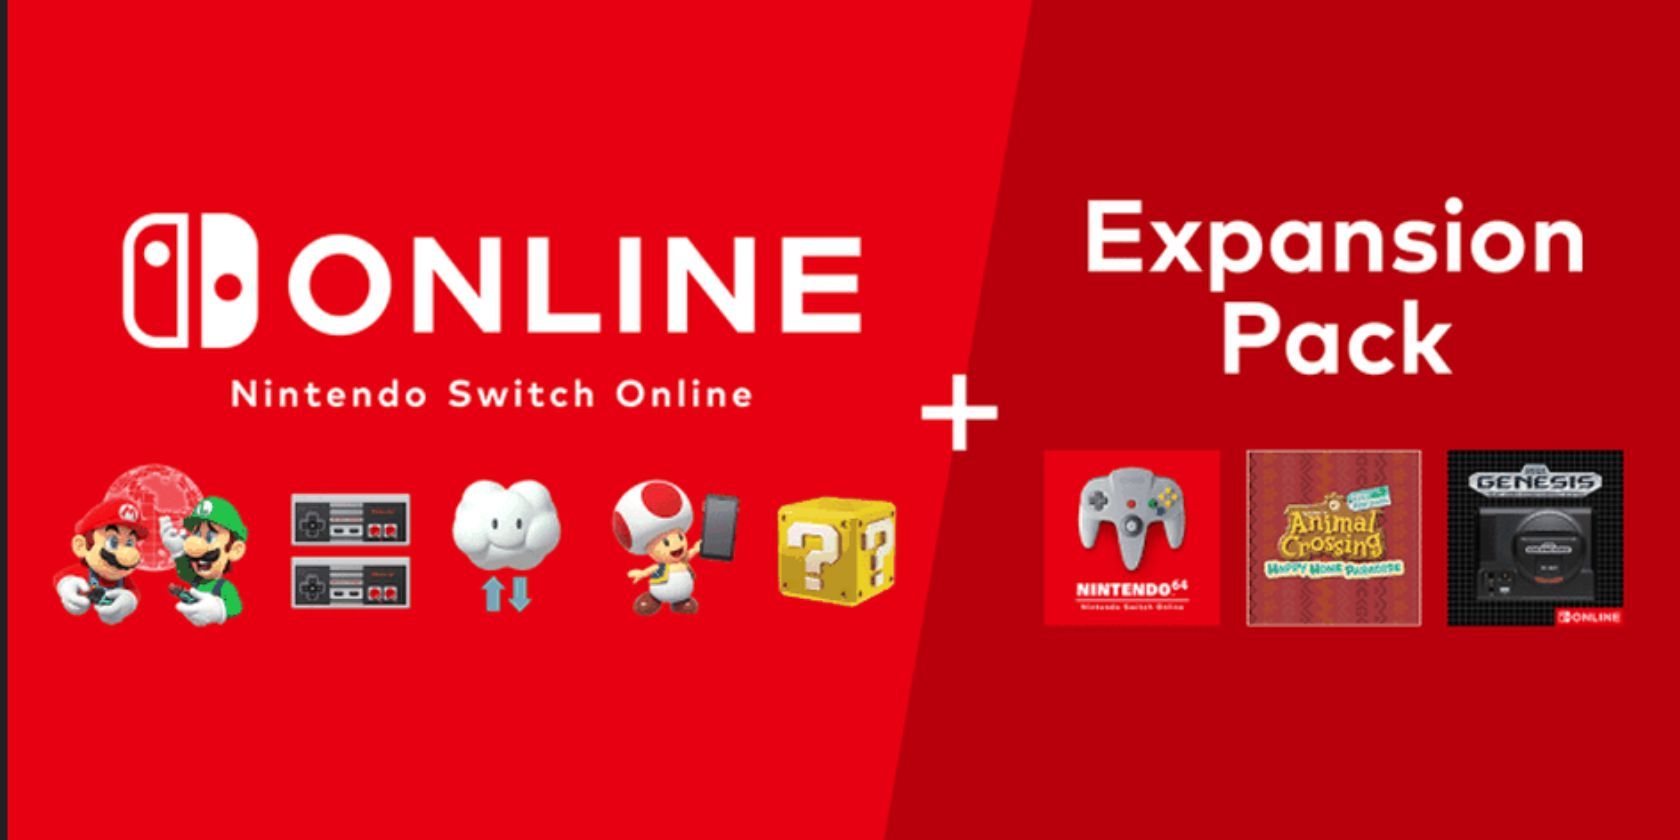 5 Reasons Why You Should Upgrade to the Nintendo Switch Online Expansion Pack